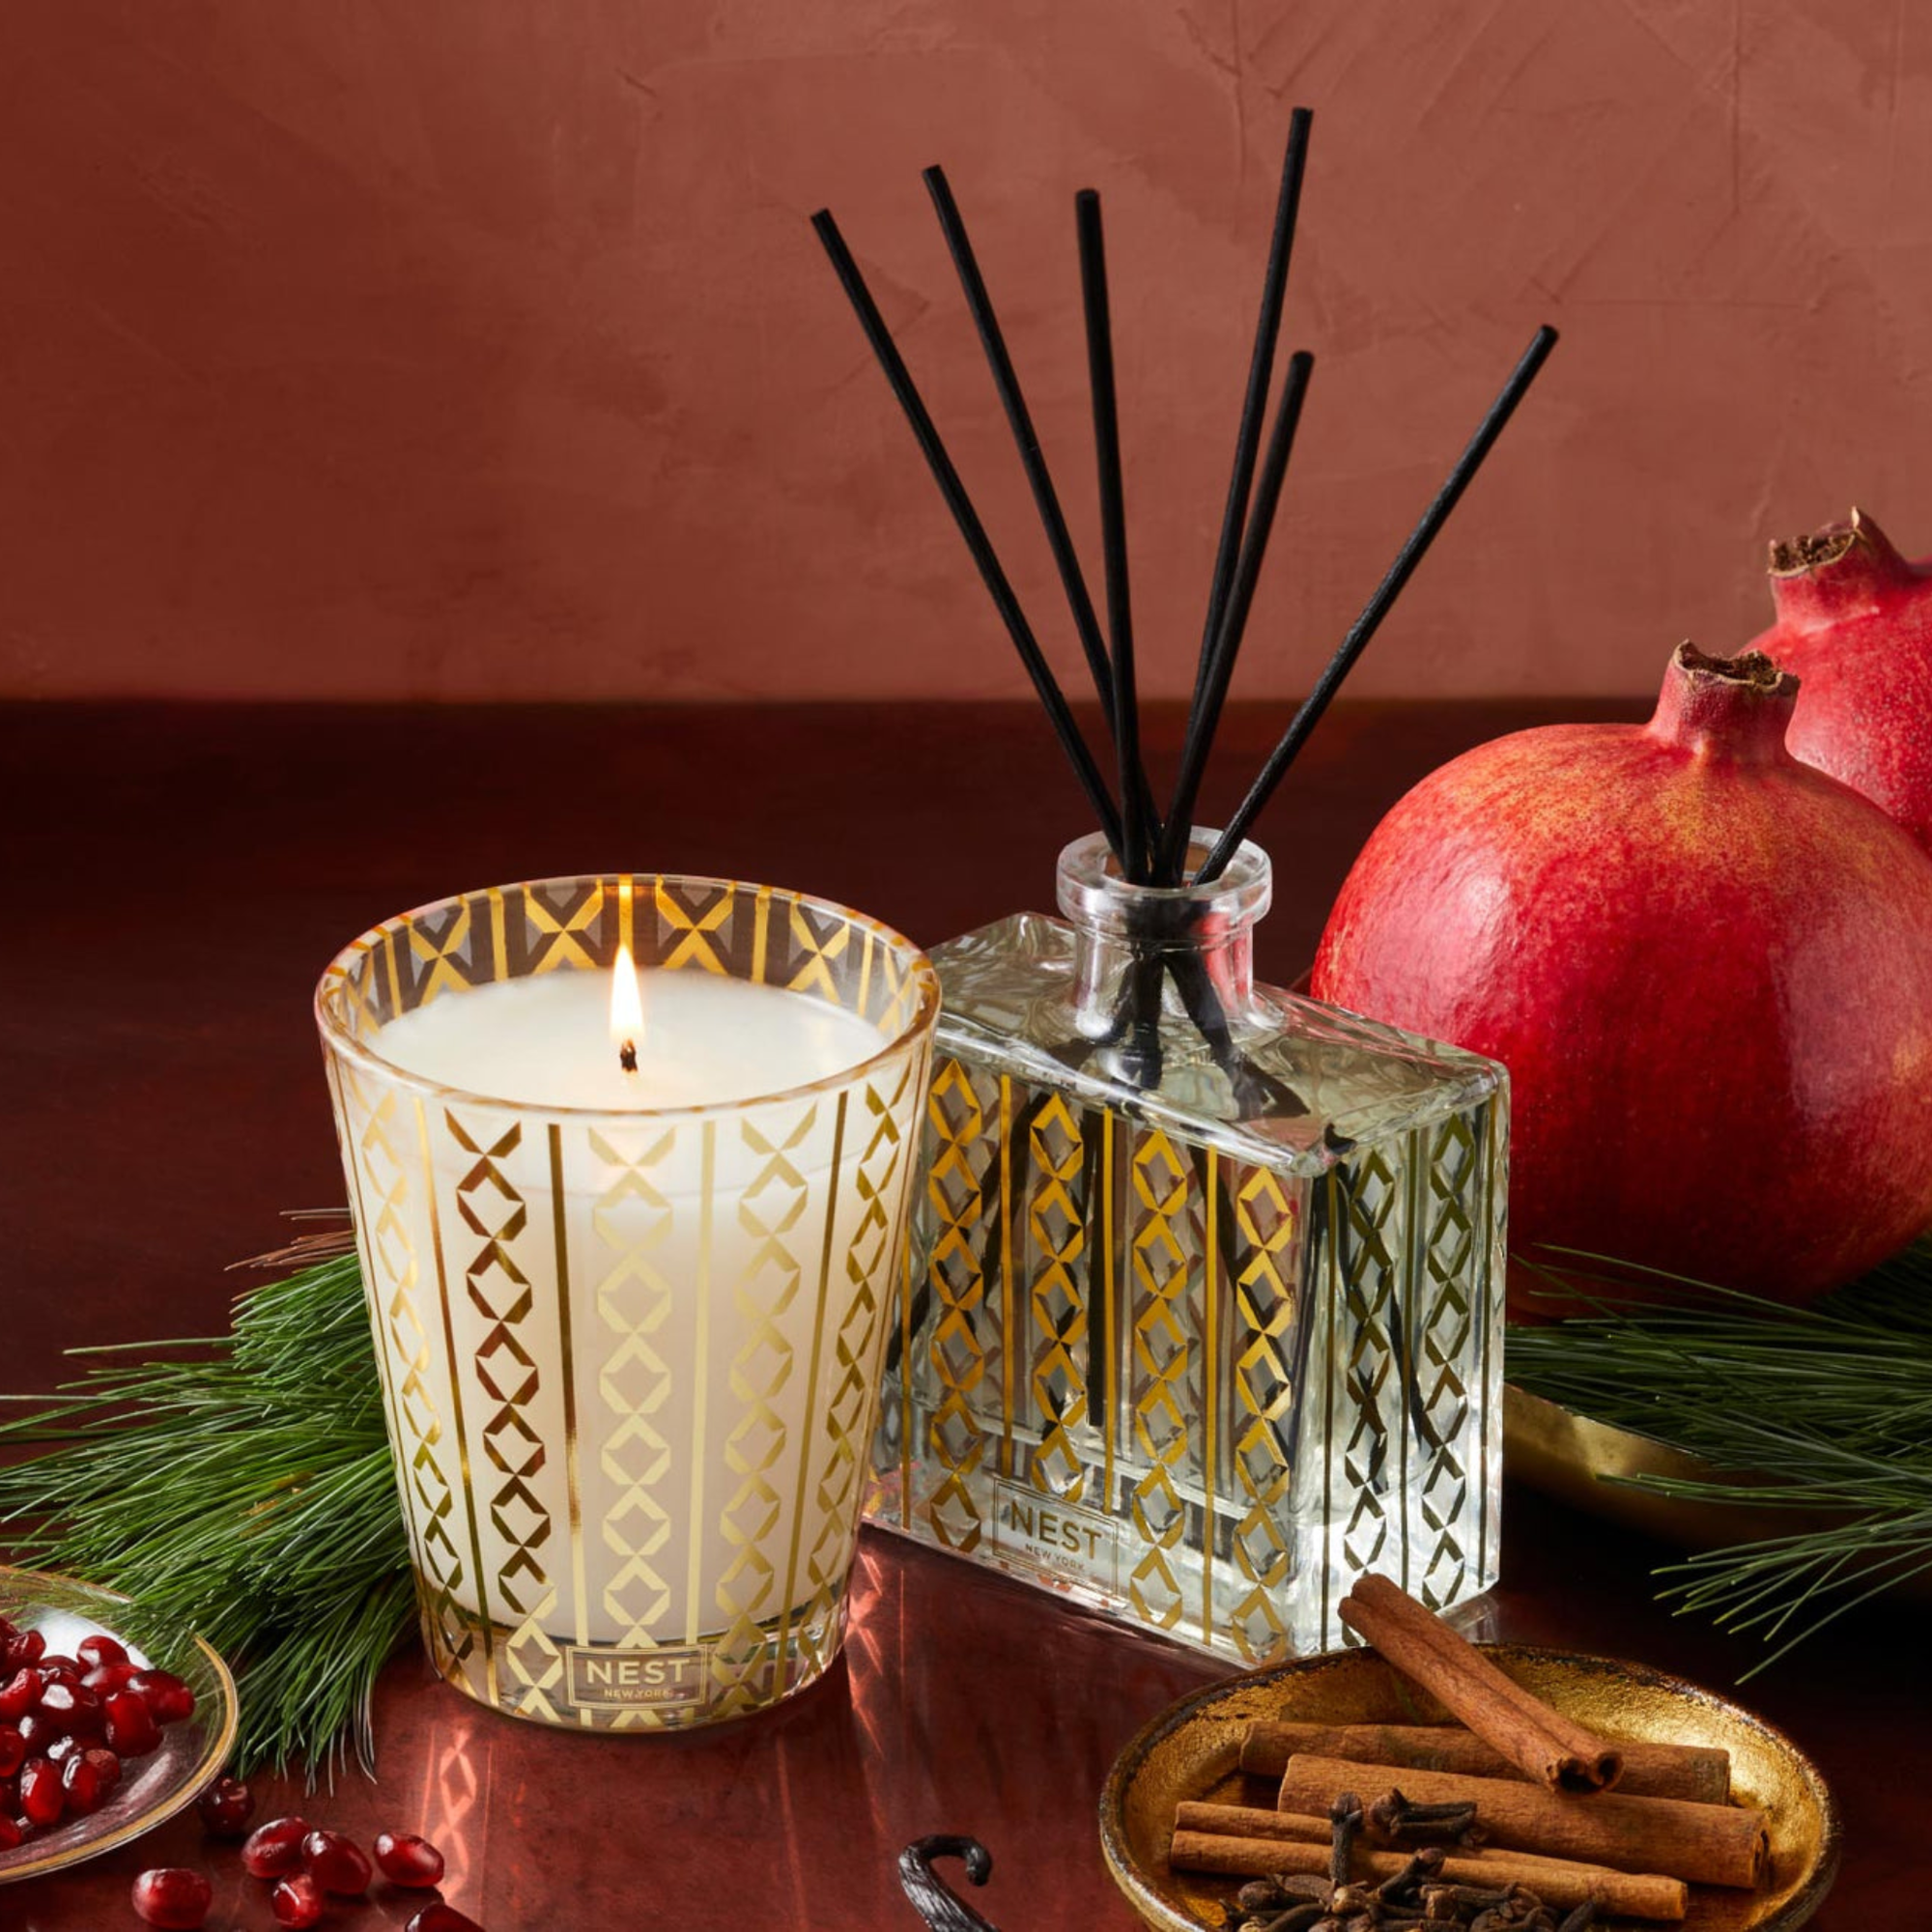 Nest New York Holiday Reed Diffuser Lifestyle with Classic Candle